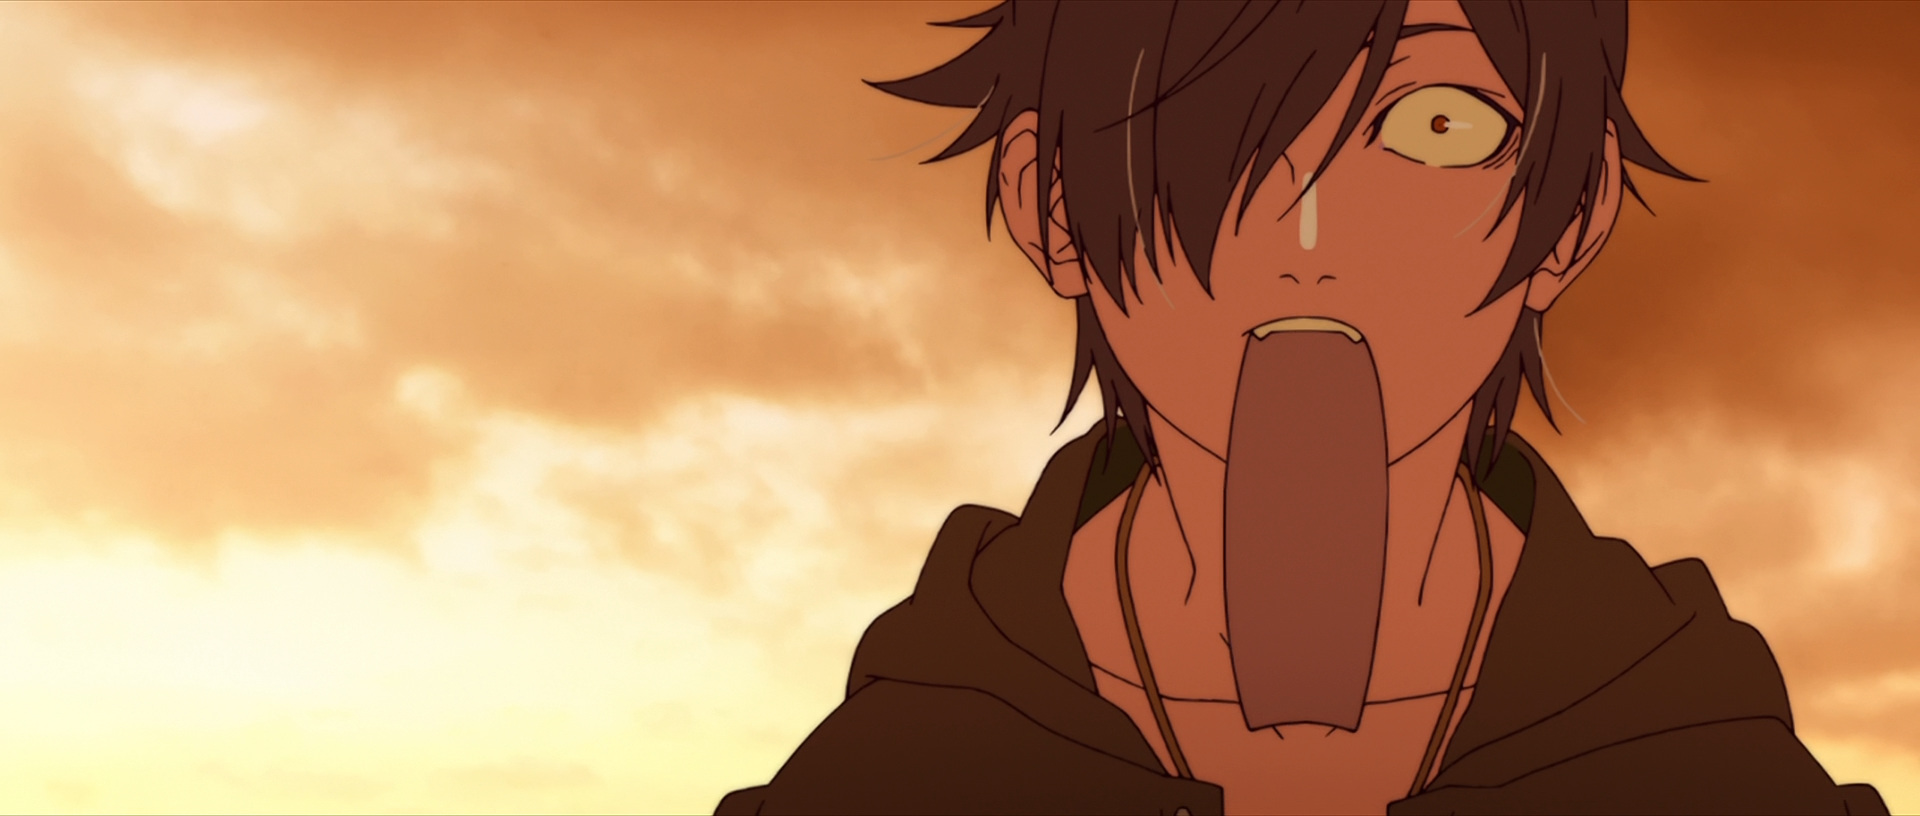 Kizumonogatari continues to prove to be an unforgettable watch. 